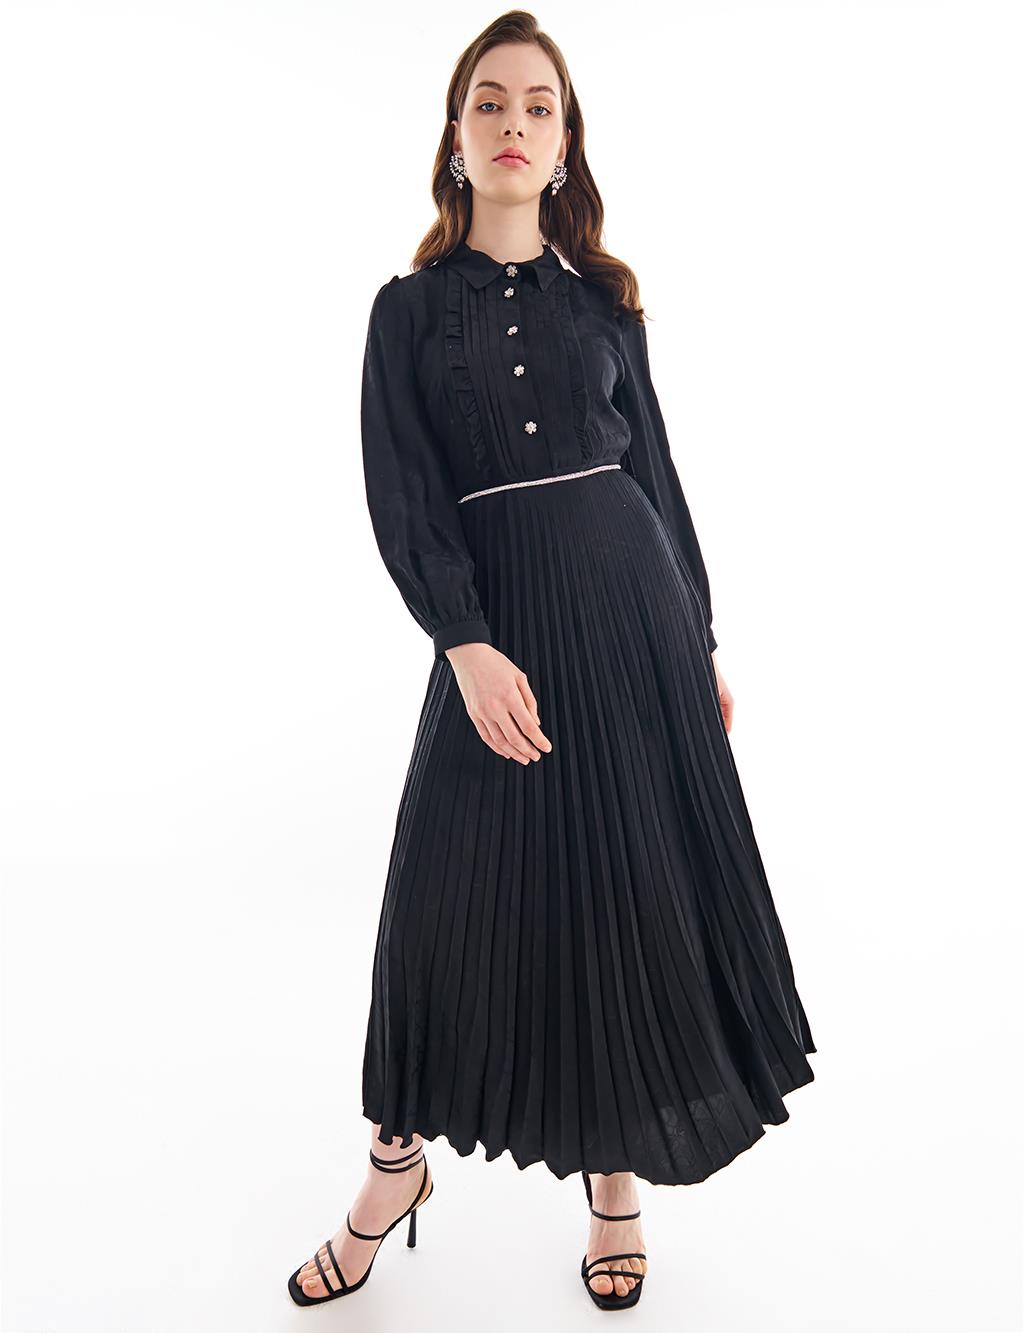 Belted Pleated Dress Black